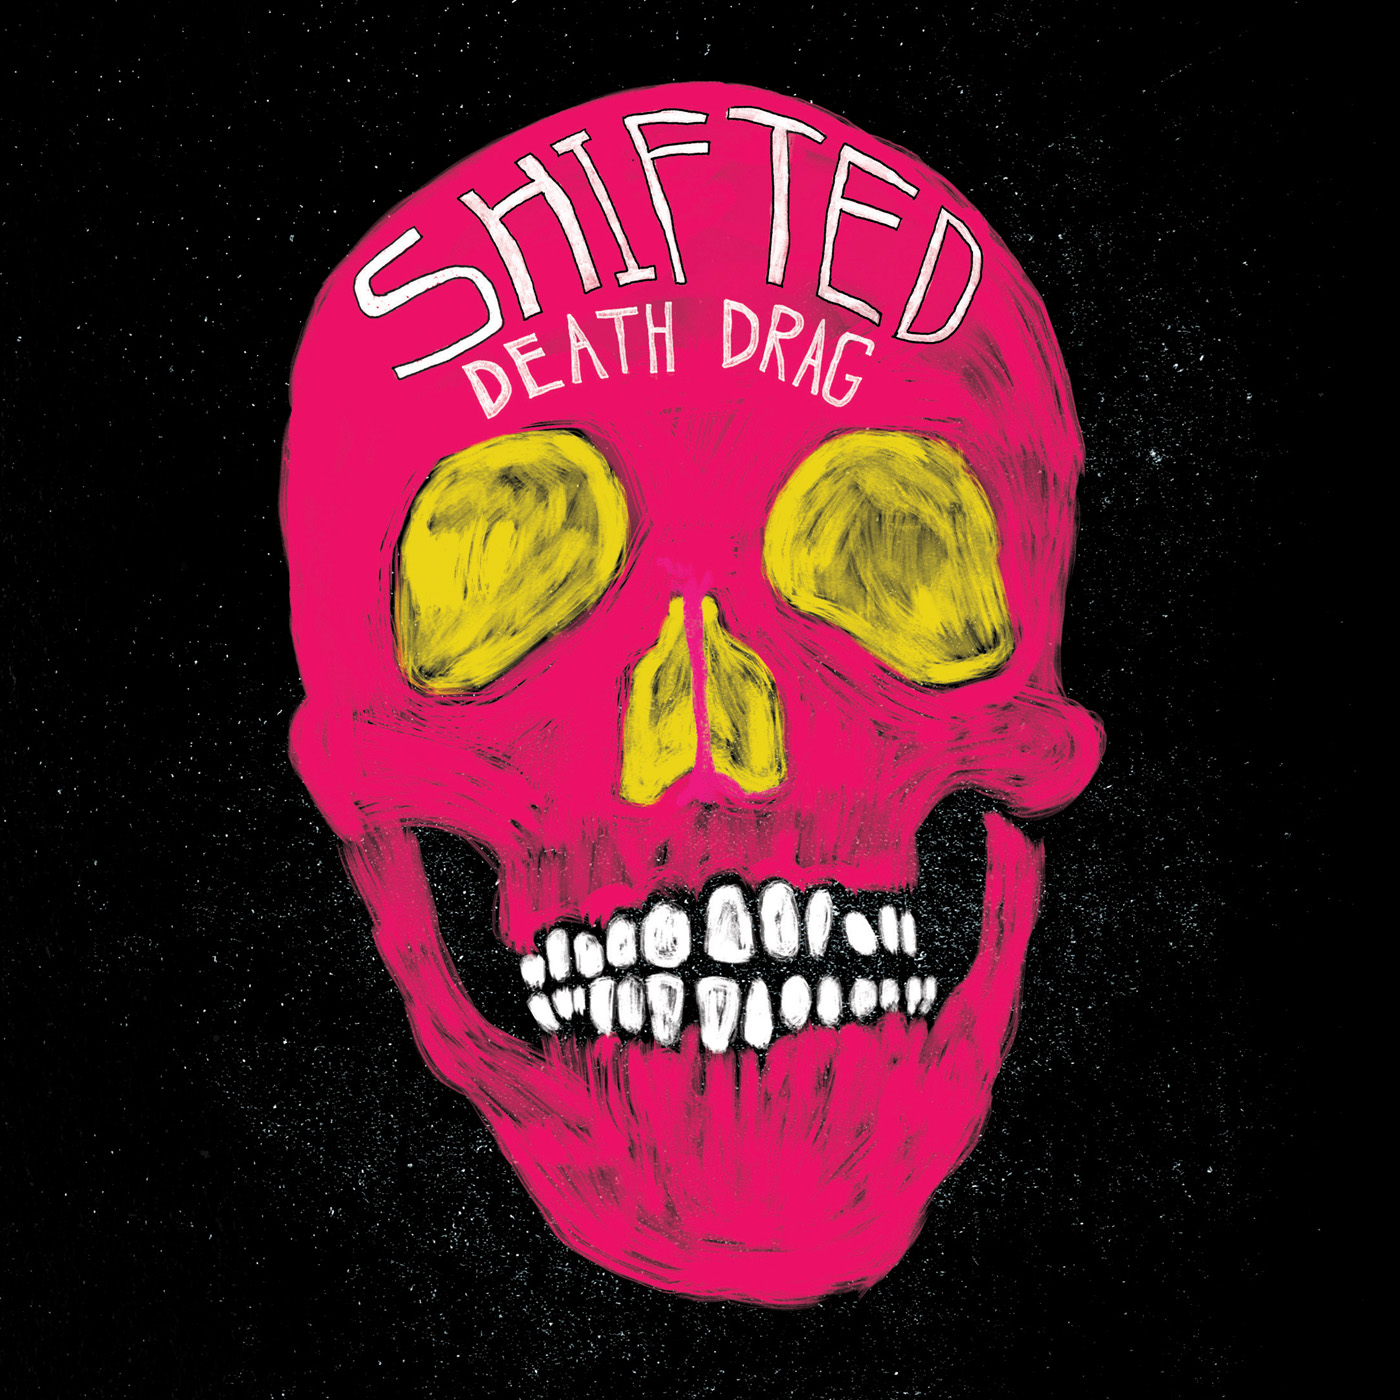 Shifted by Death Drag